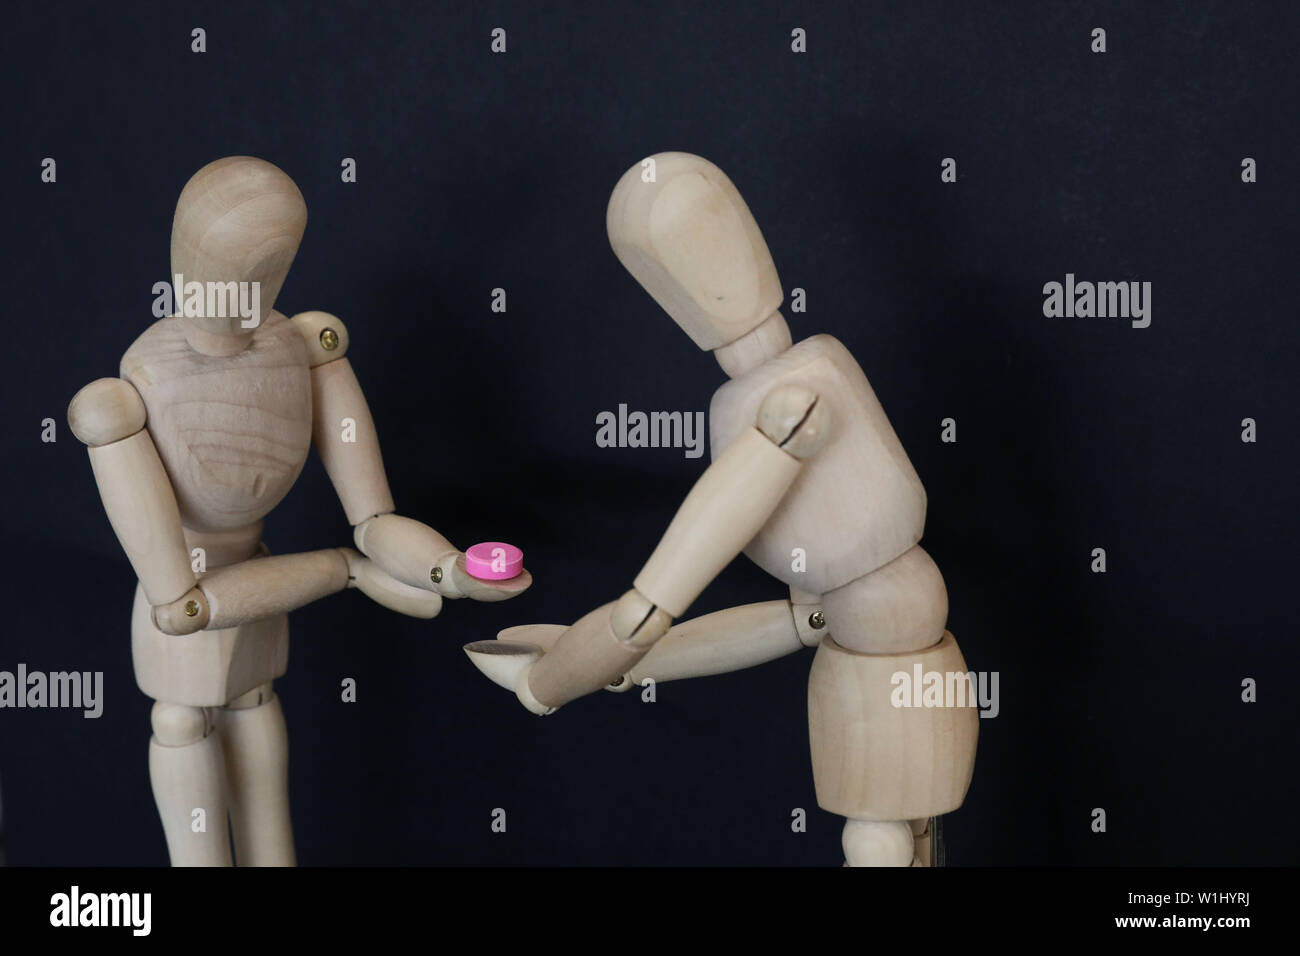 2 wooden mannequins one accepting a pink pill tablet drug from the other. Illegal prescription drug taking choice decision concept. drug education awa Stock Photo